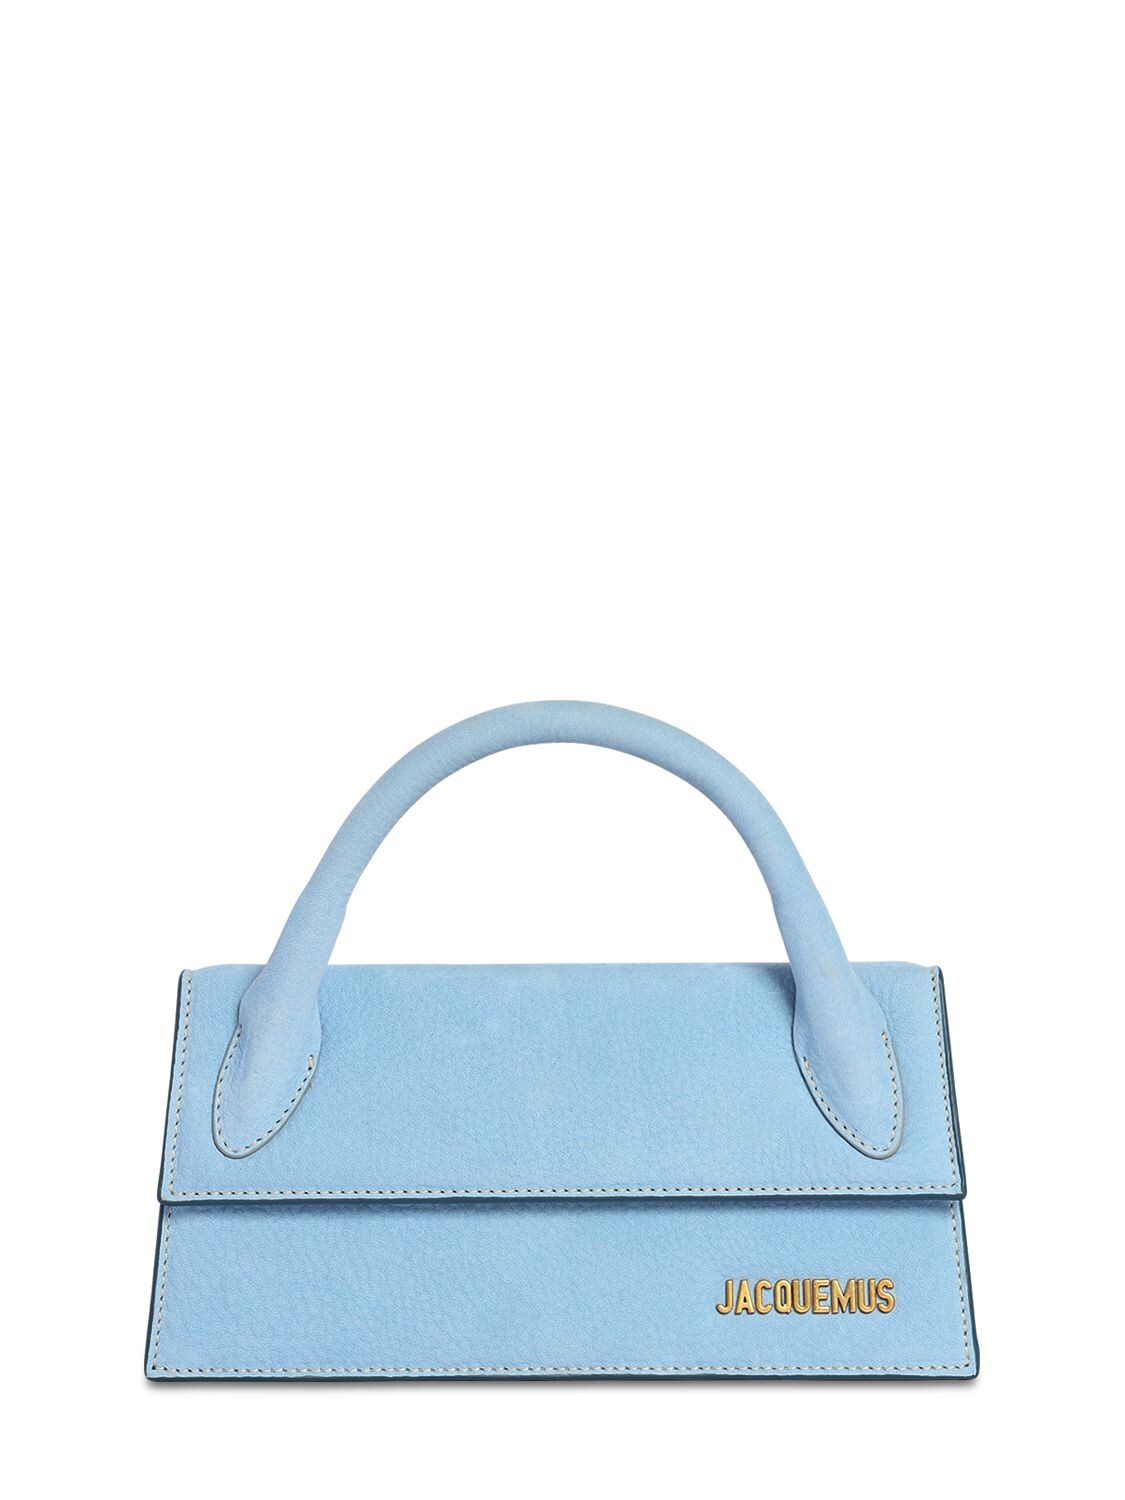 JACQUEMUS LE CHIQUITO LONG LEATHER BAG,72I5CK063-MZQW0